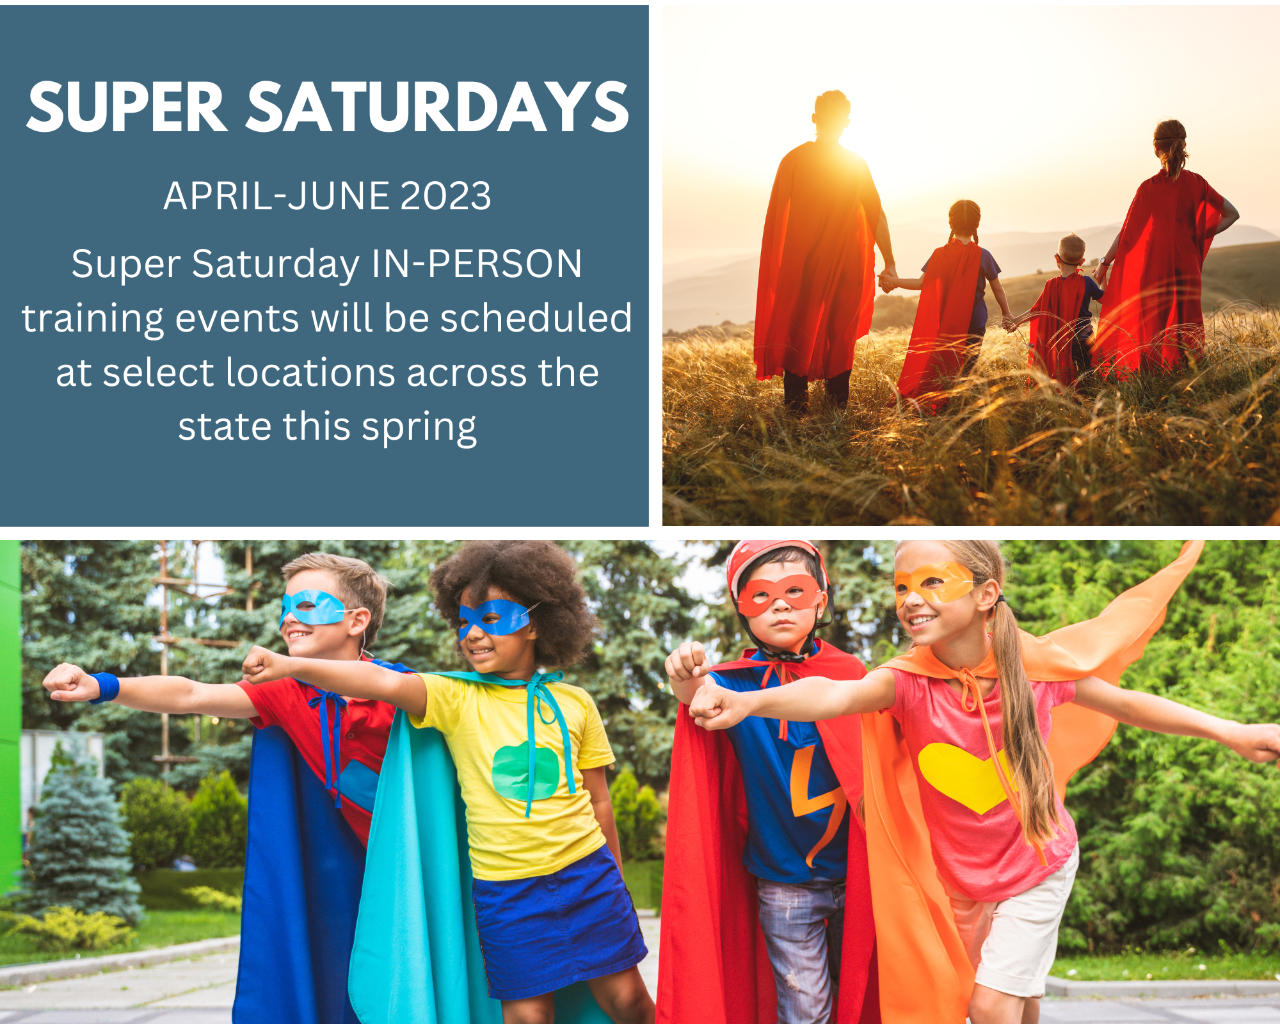 Super Saturdays: April-June 2023. In-person training events will be scheduled at select locations across the state this spring. Registration information coming soon.